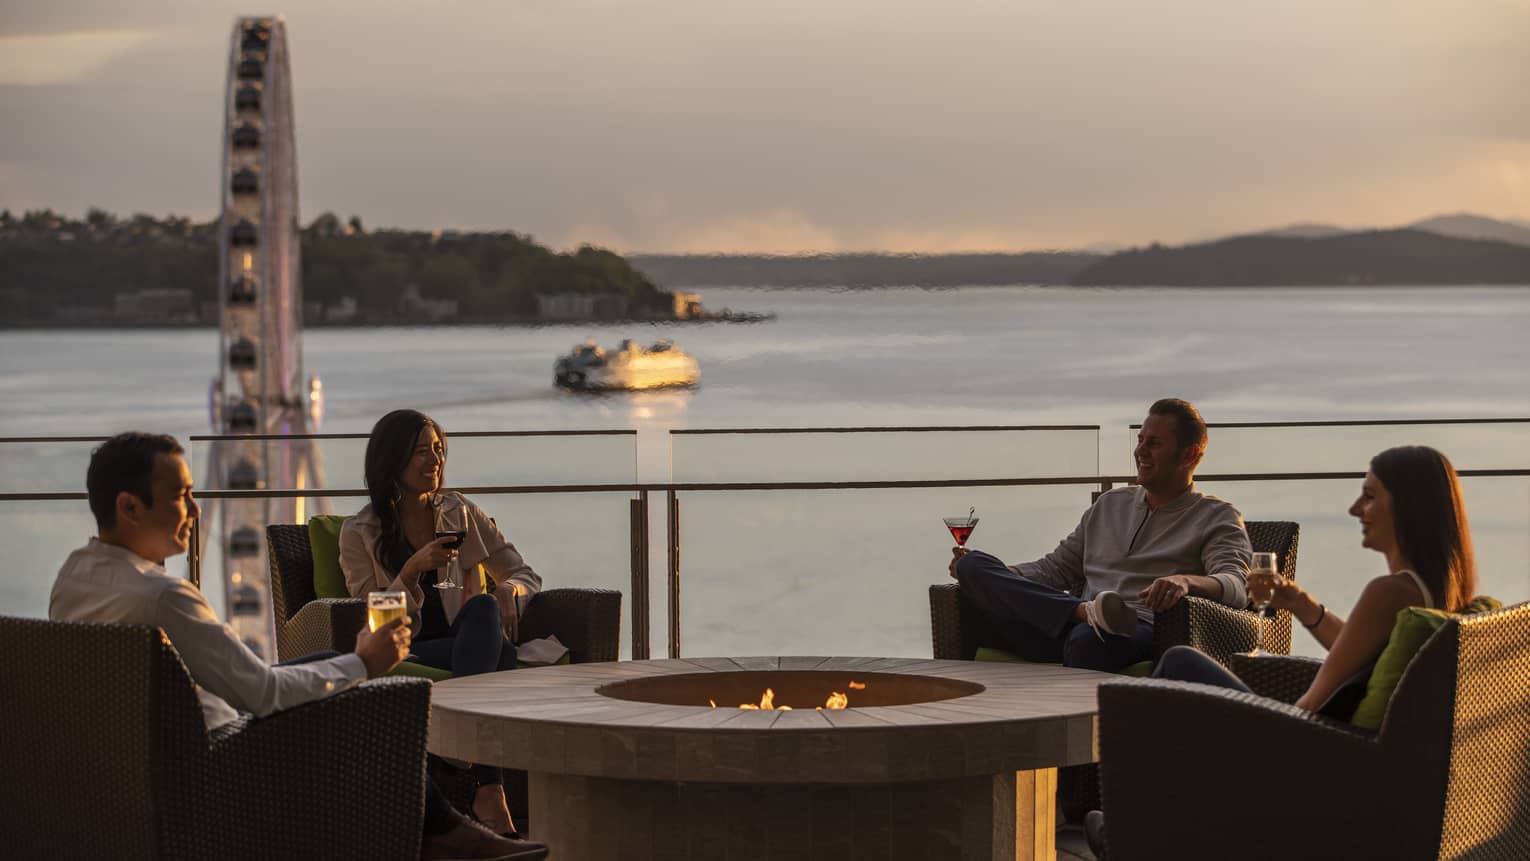 Guests enjoy drinks by the firepit with a view of the Seattle Great Wheel and bay behind them